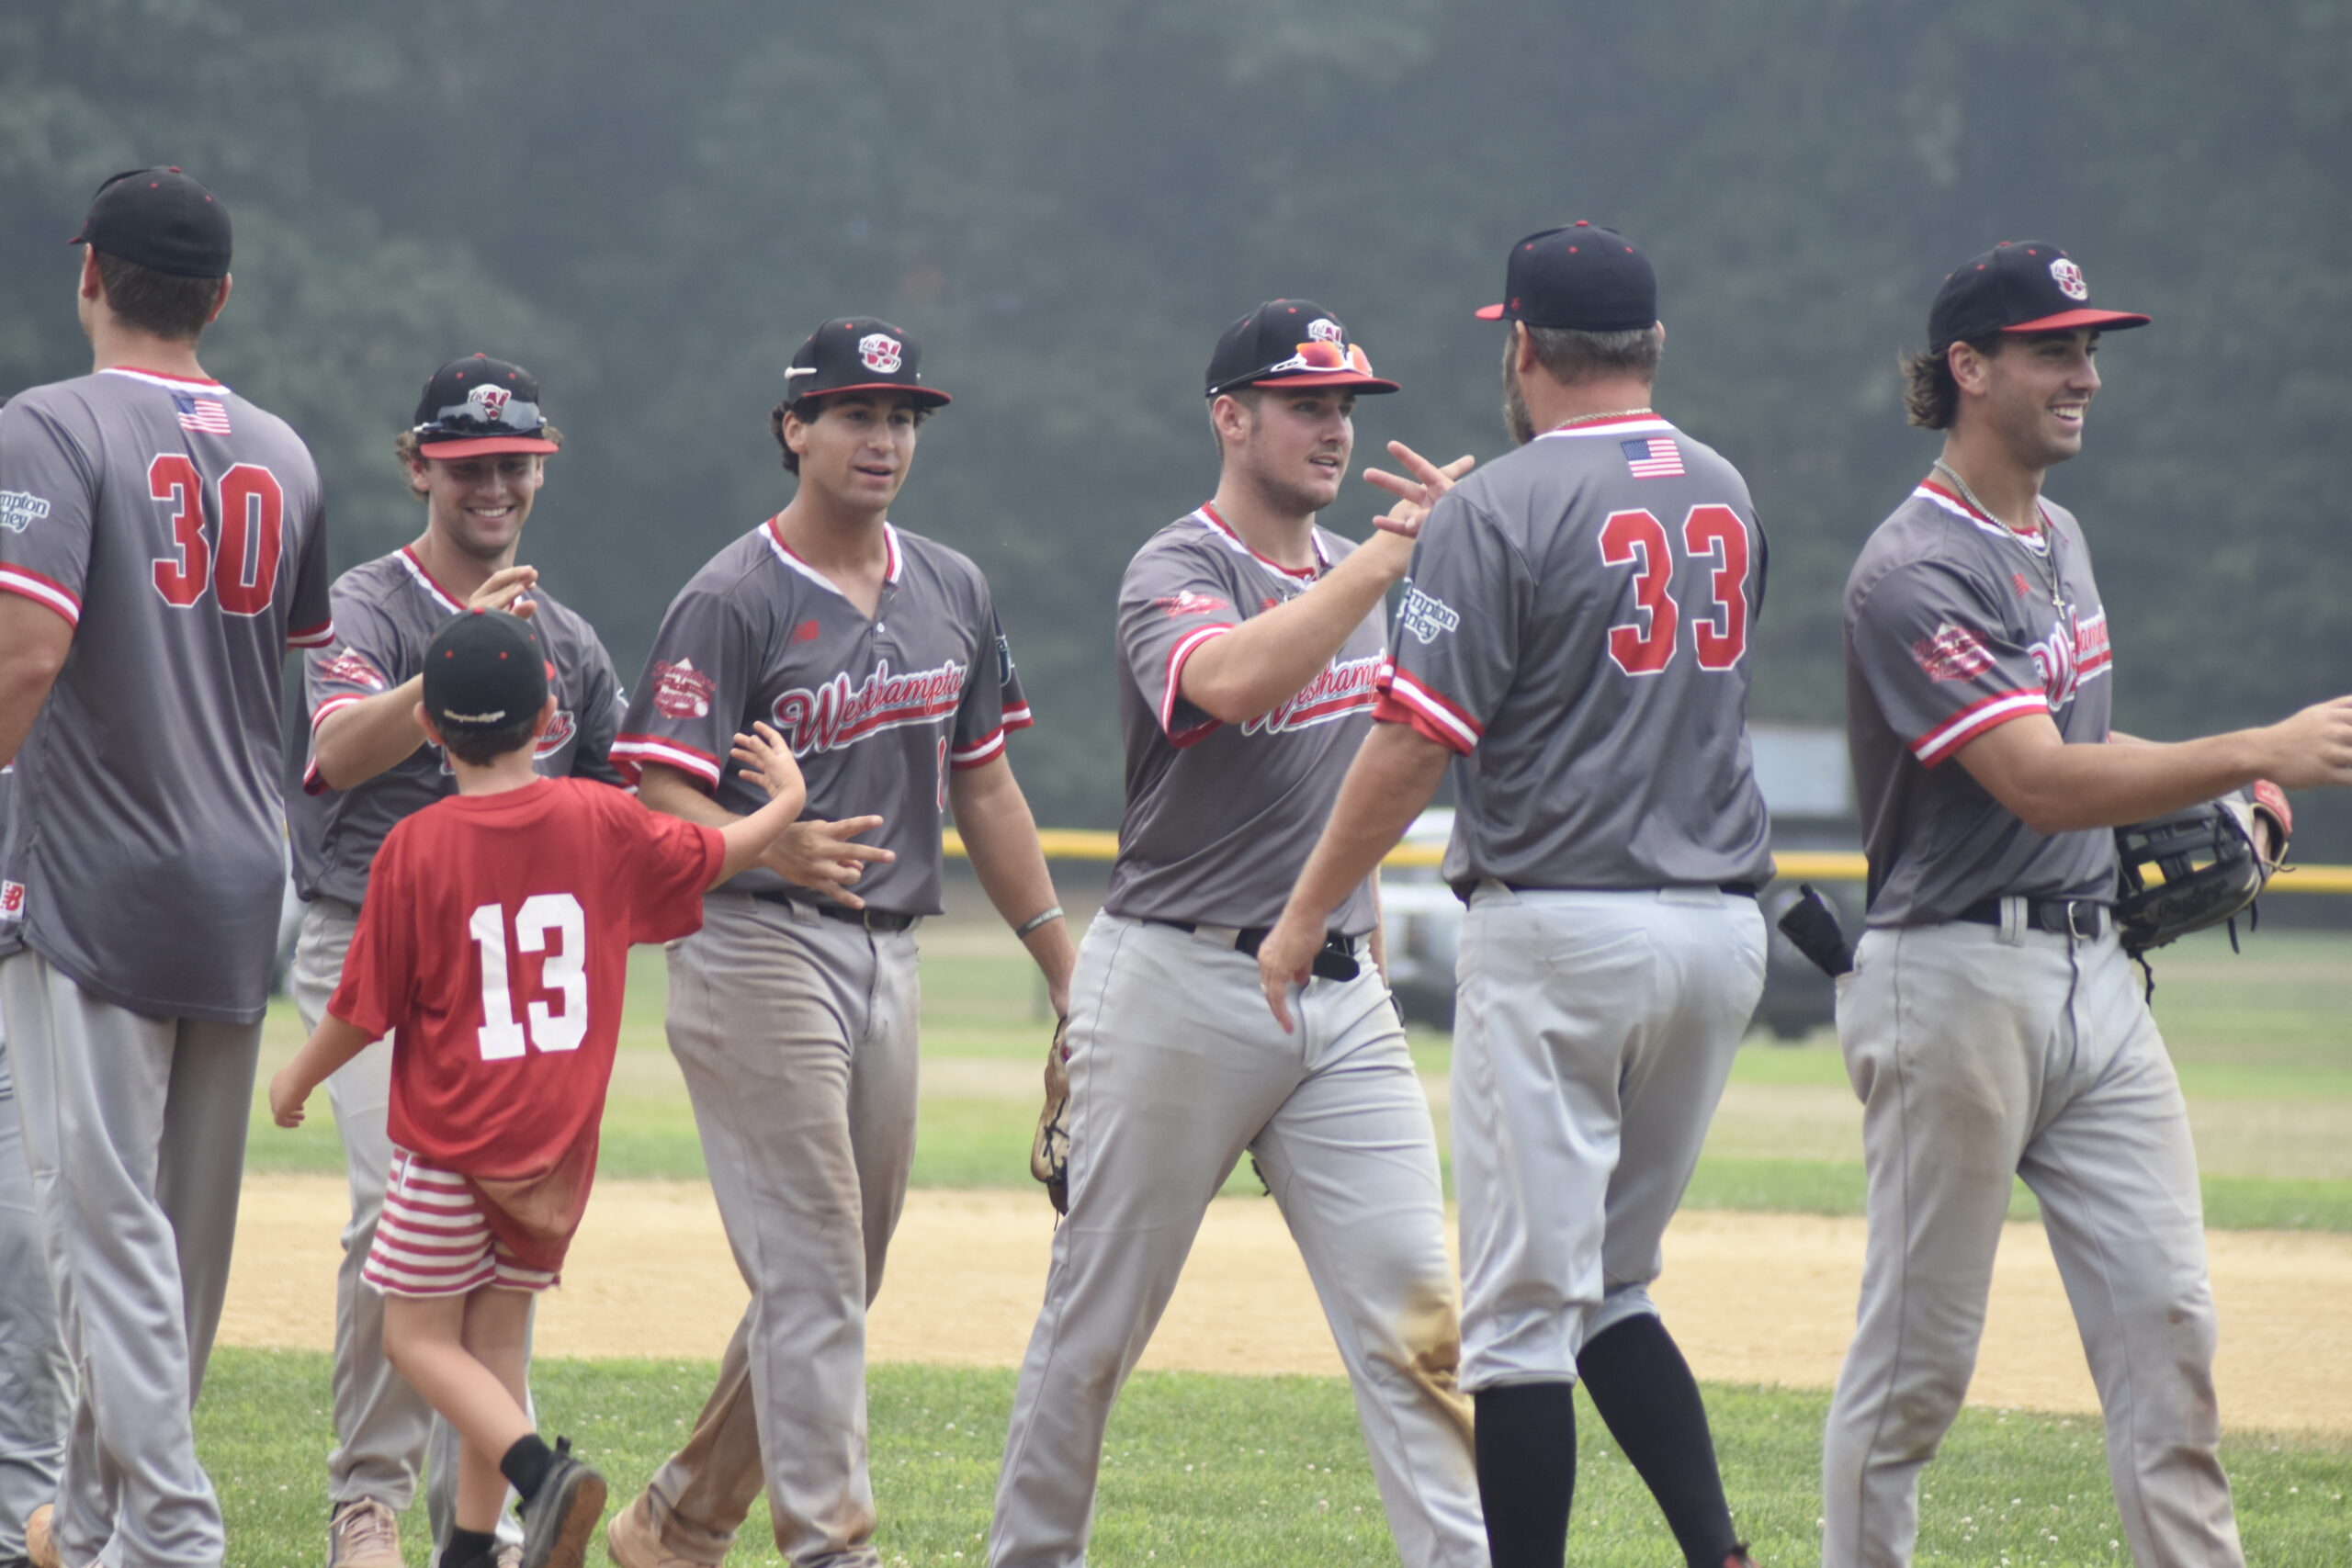 The Aviators are all smiles after their come-from-behind 2-1 victory over South Shore in Bellport on Thursday, July 28, advanced them to the HCBL Championships.    DREW BUDD